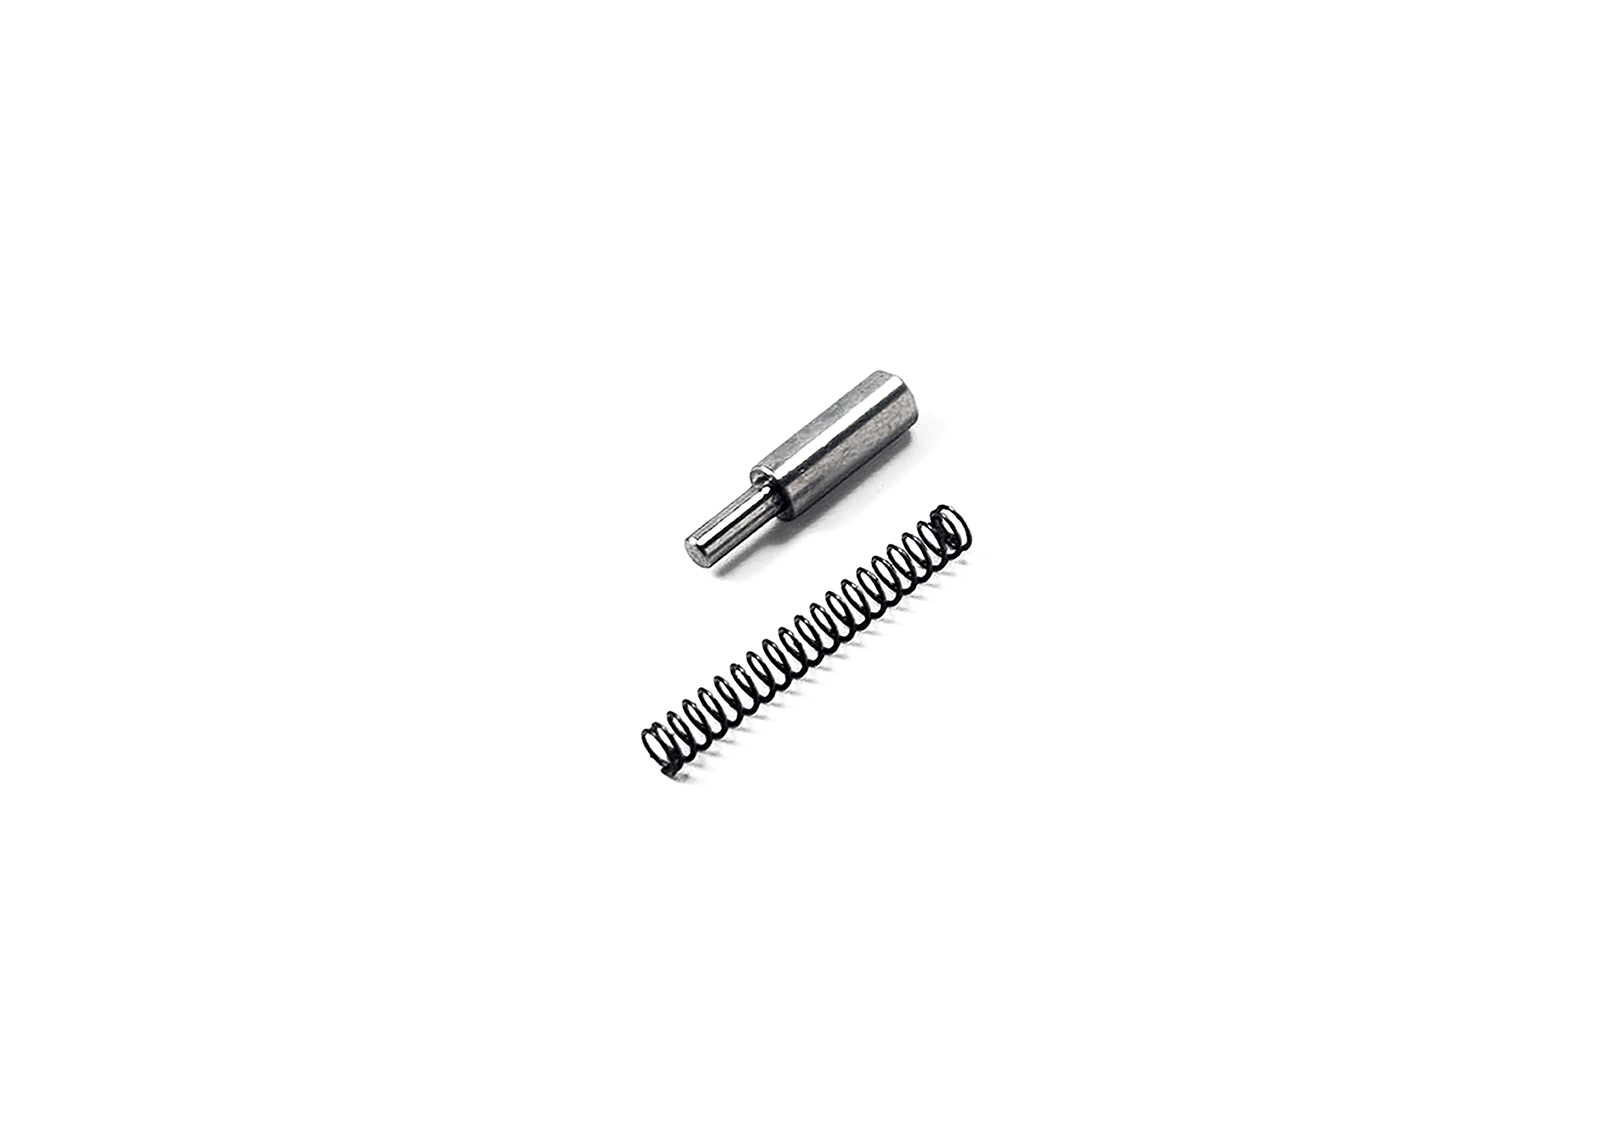 MOD24 / SSG24 / Scout Stainless Bolt Clip Pin with Spring - Modify Bolt Action Rifle Parts